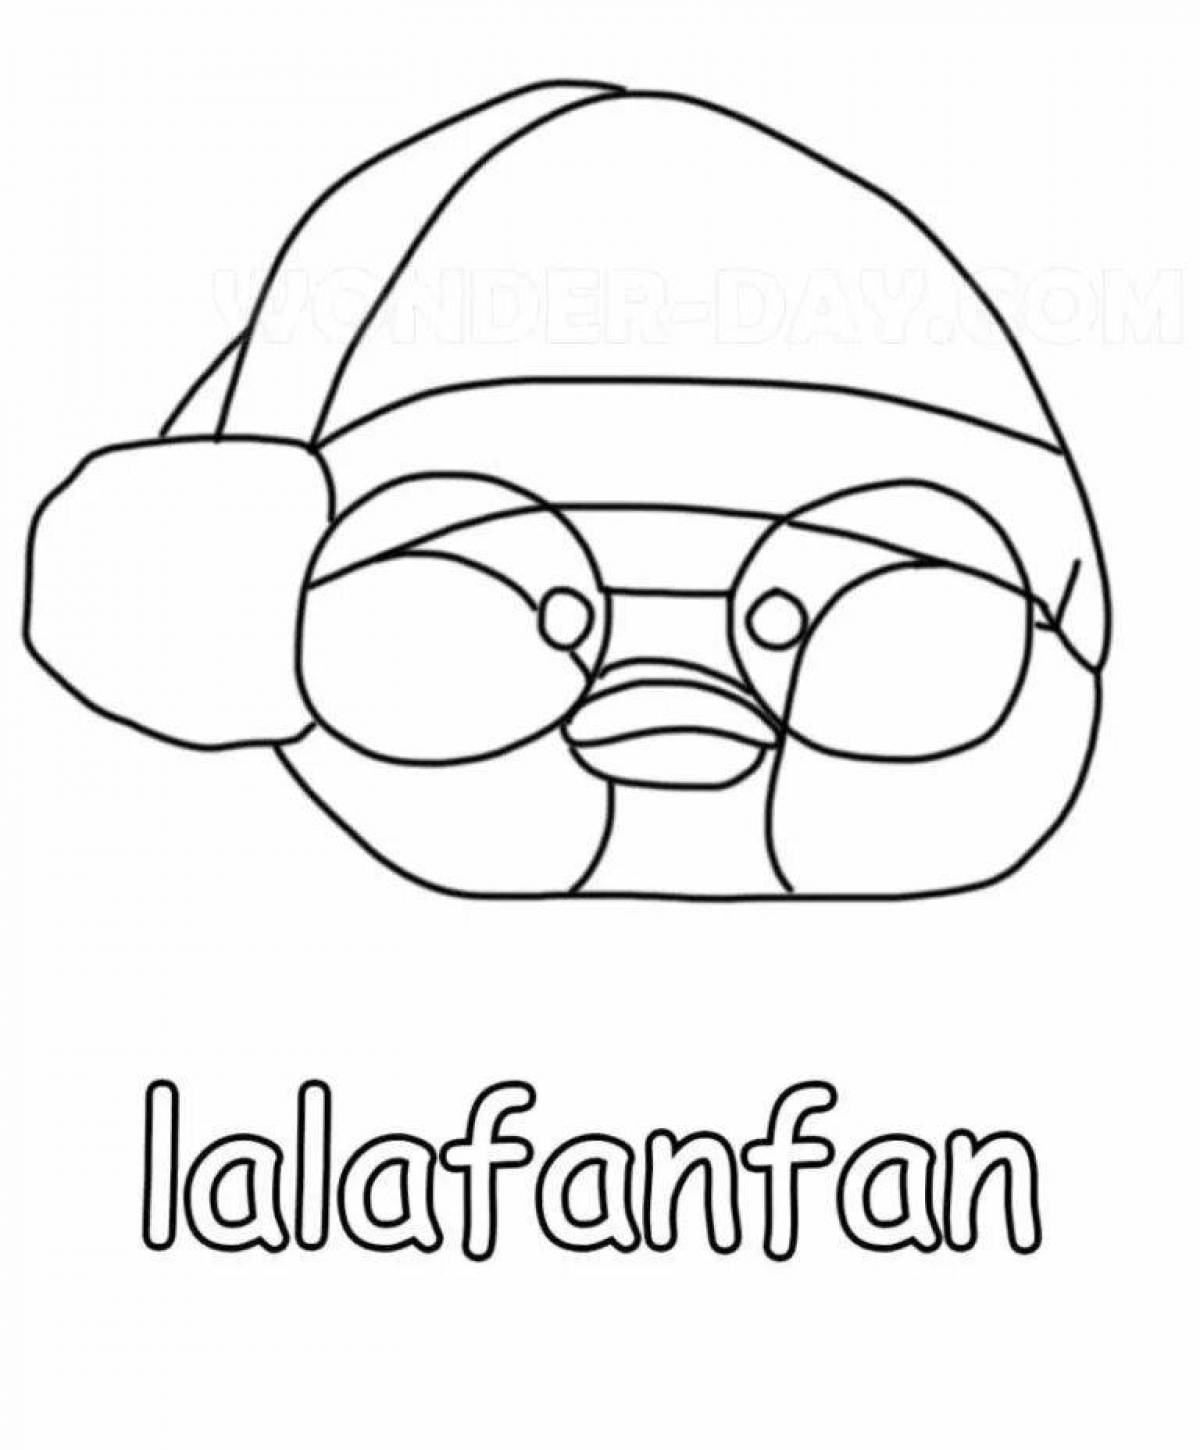 Coloring page hypnotic duck fanfan